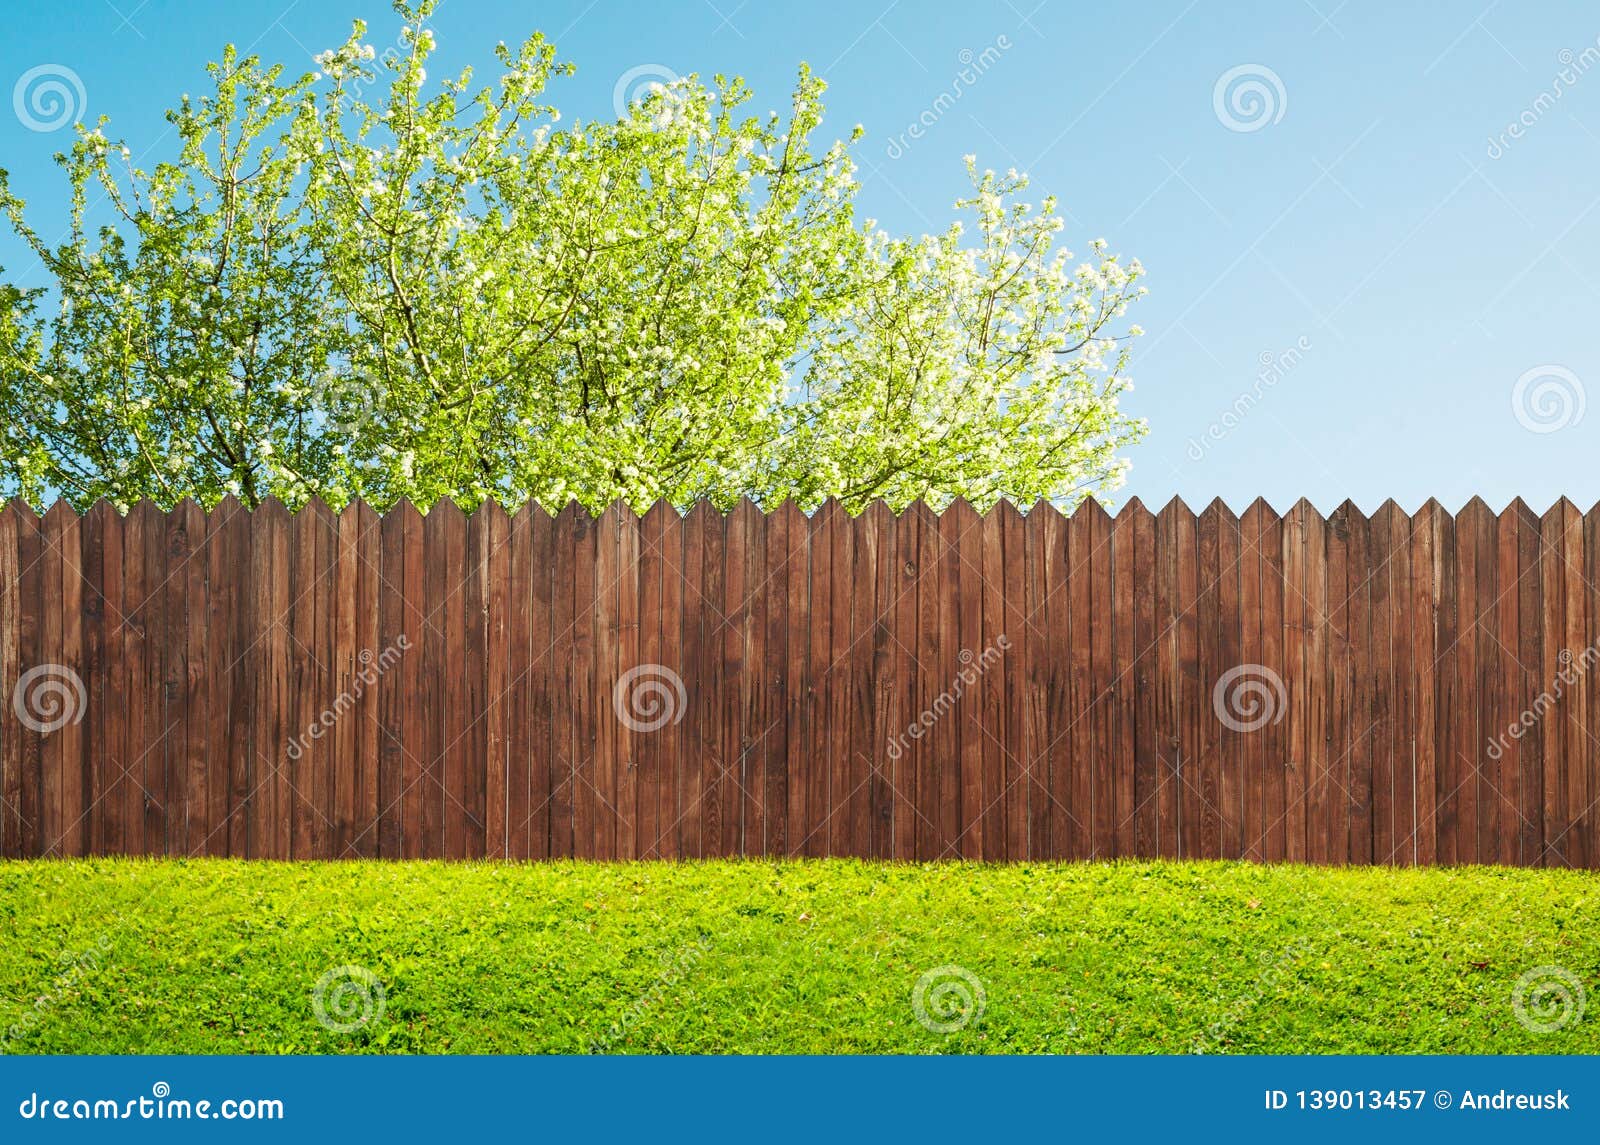 a wooden garden fence at backyard and bloom tree